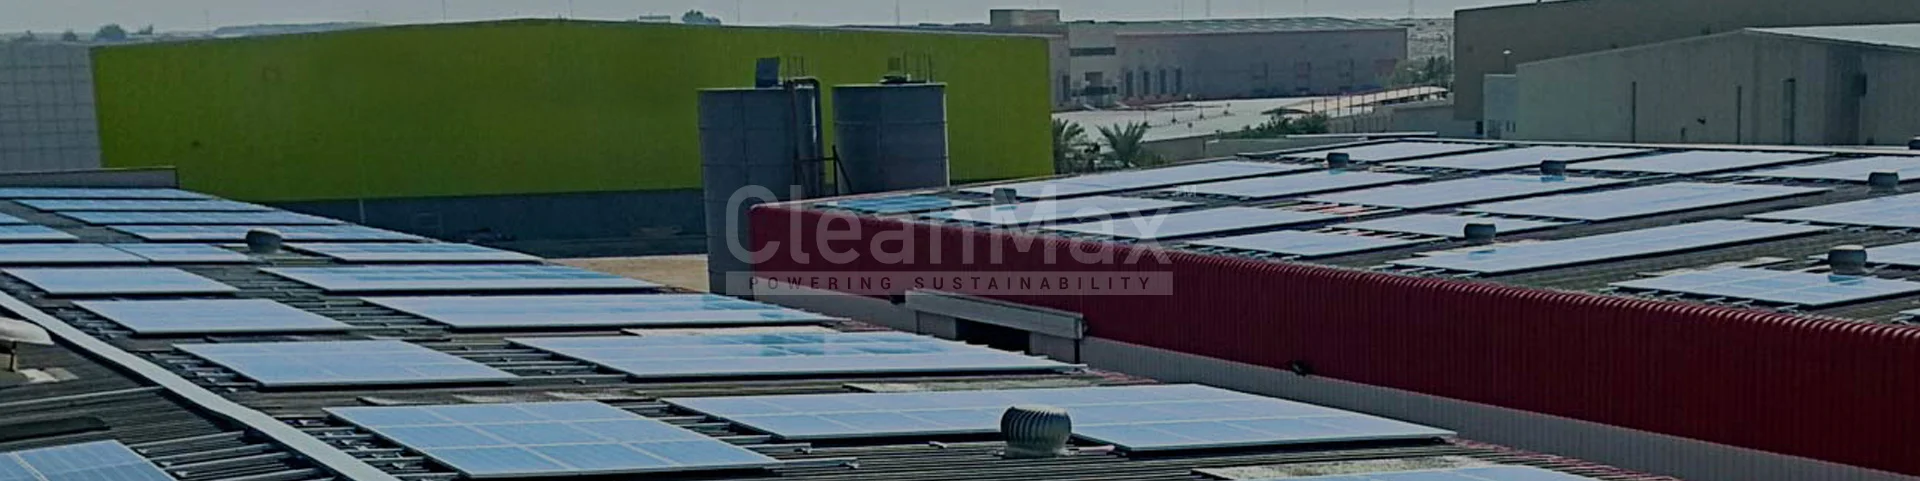 CleanMax case study sustainable energy solutions